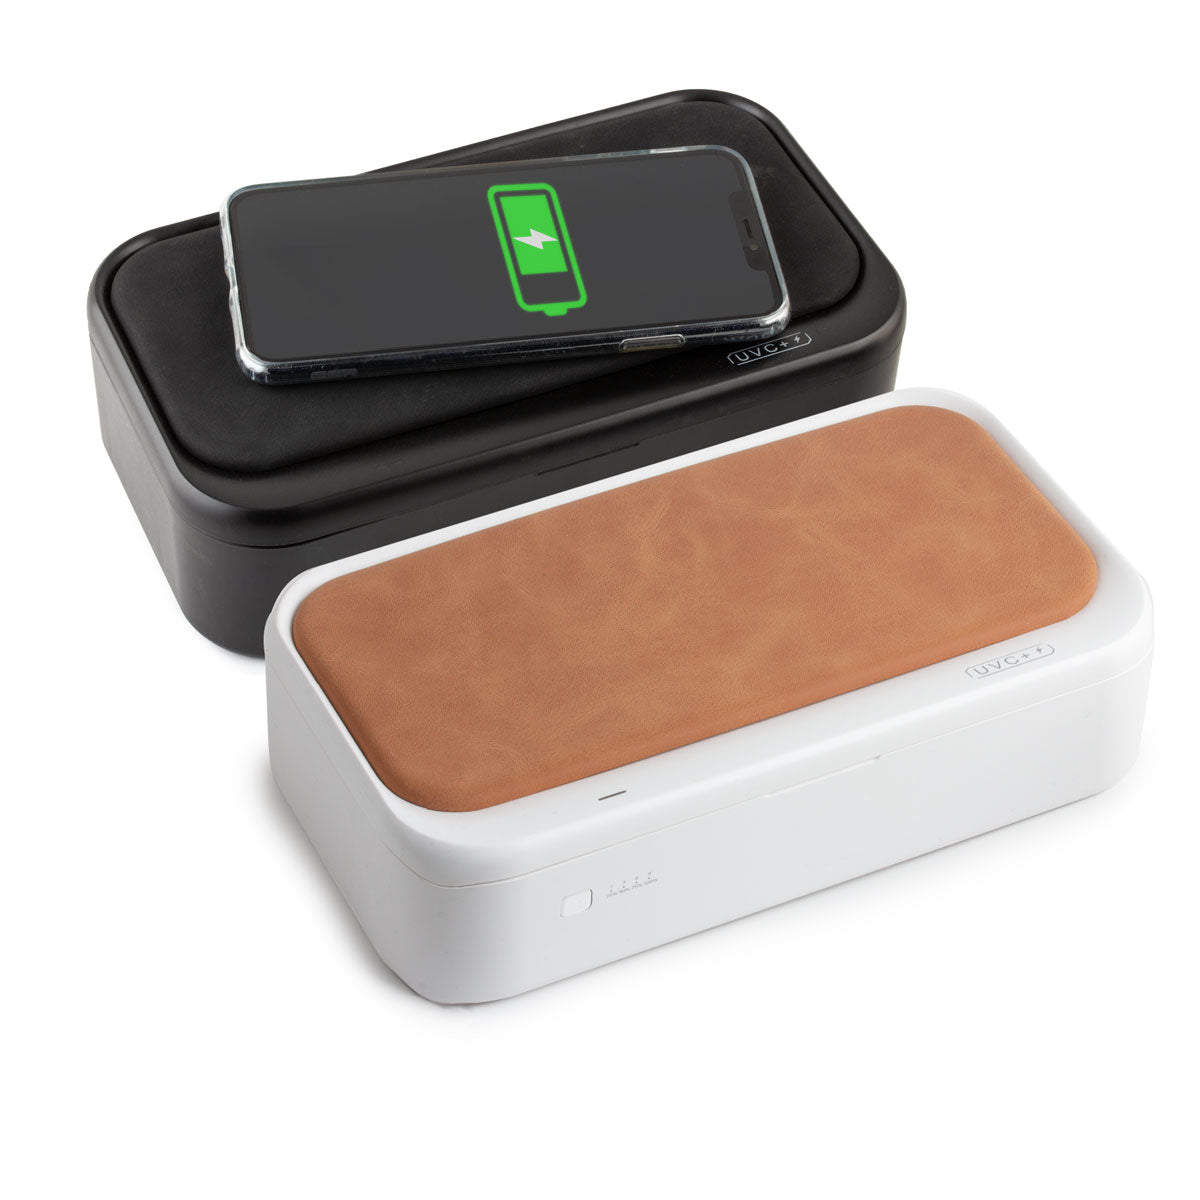 Smart Covid - Phone and keys UV sterilizer / wireless charger - Aged calf